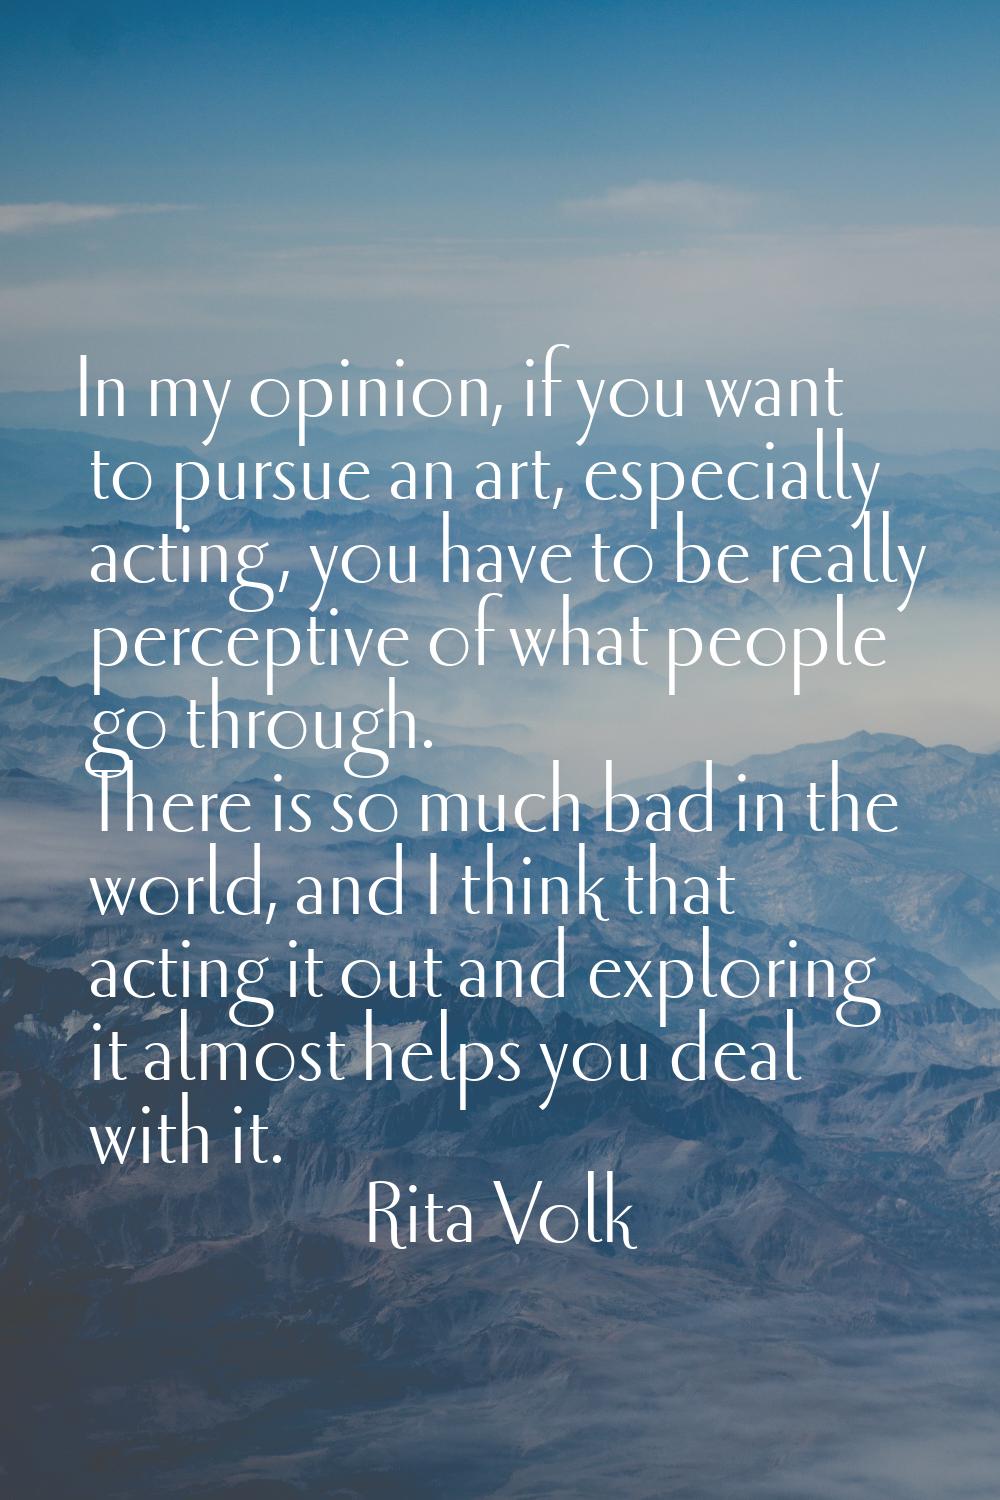 In my opinion, if you want to pursue an art, especially acting, you have to be really perceptive of